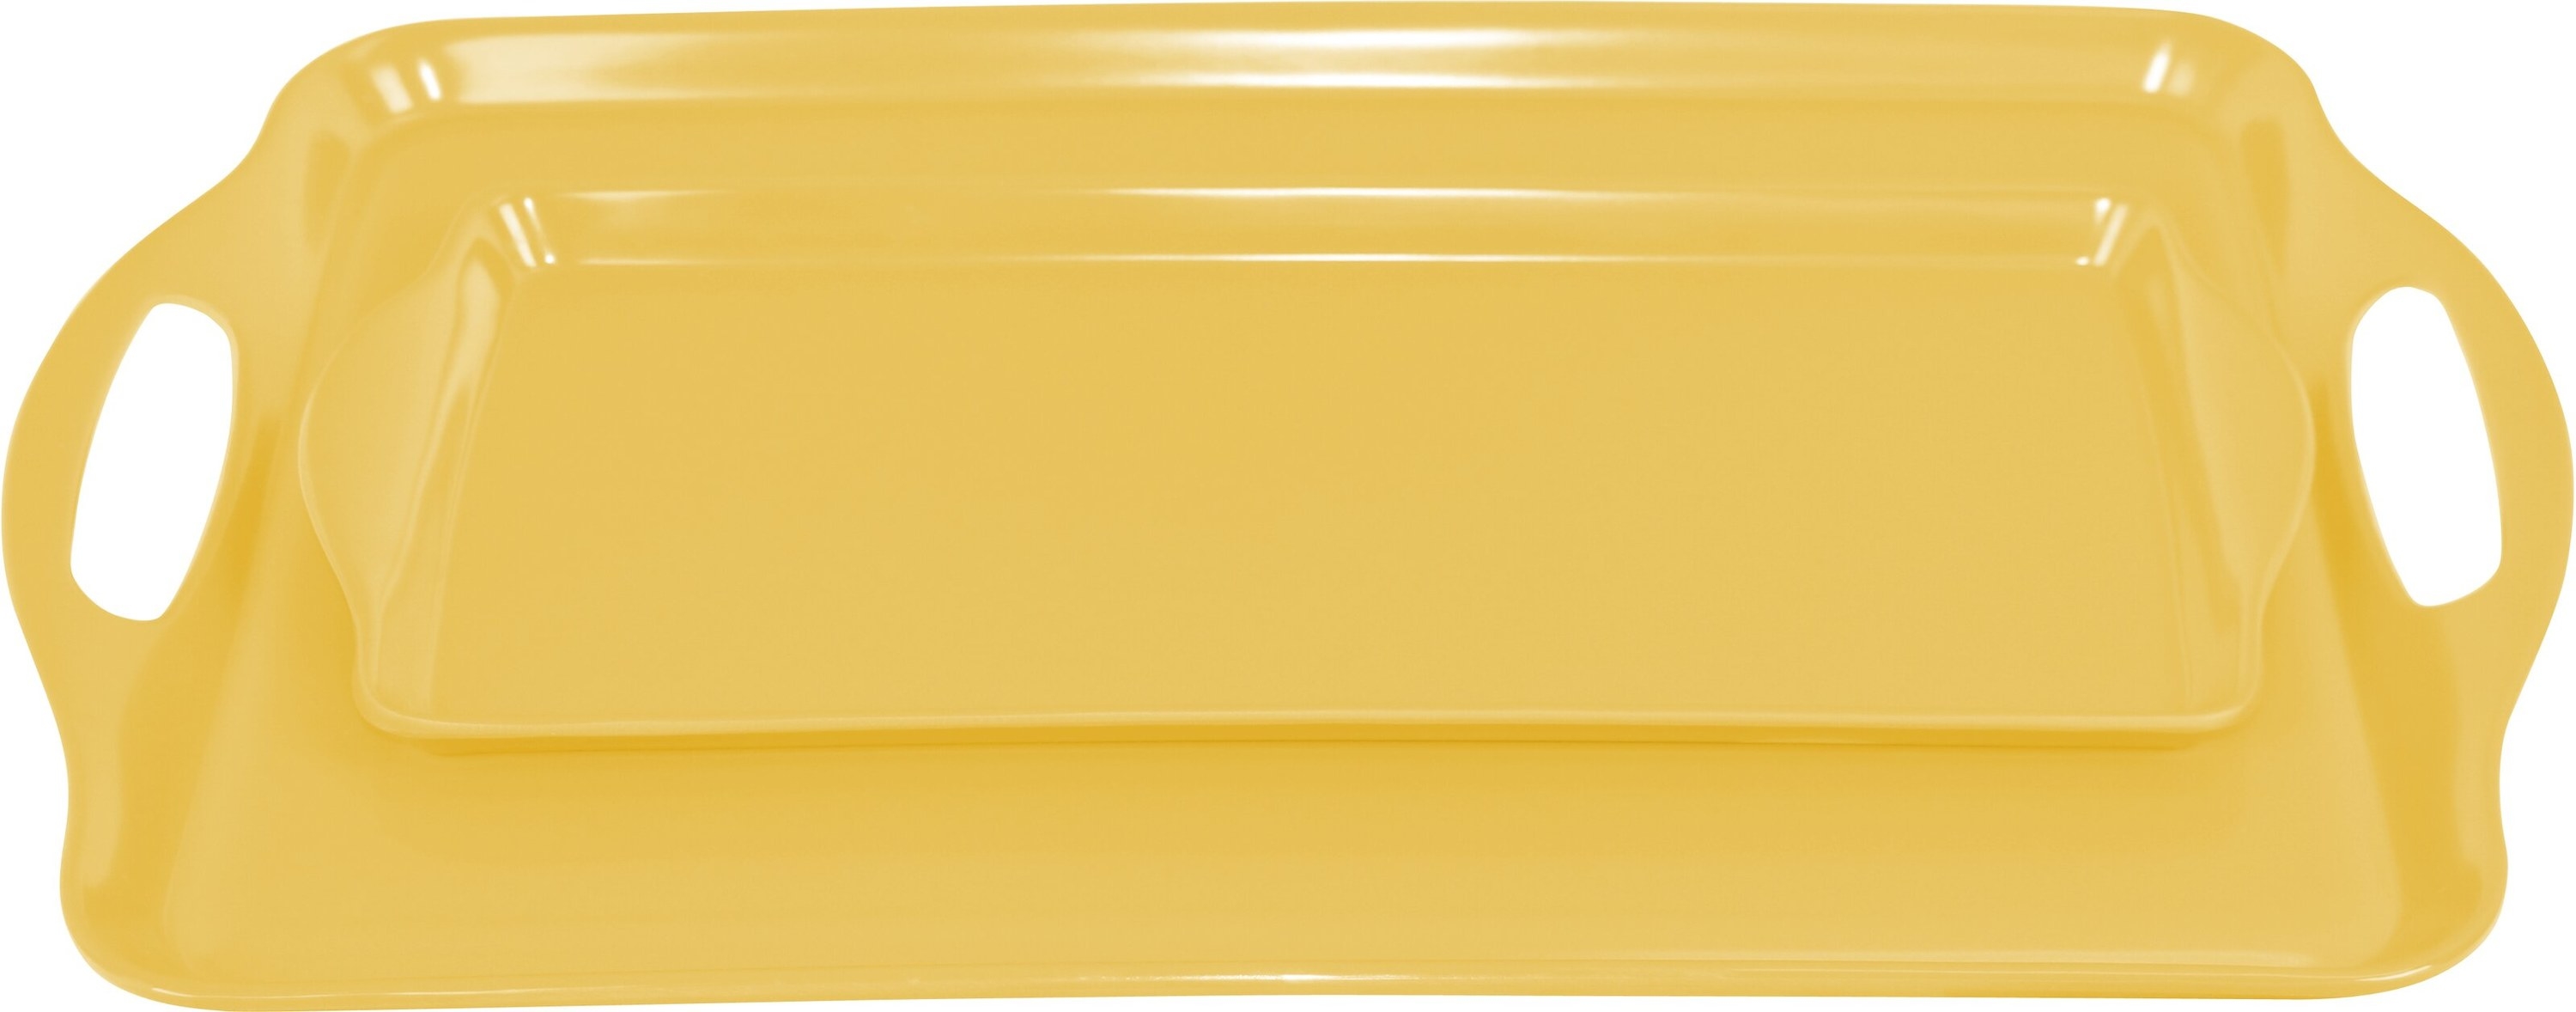 Two bright yellow trays, one sitting in top of the other